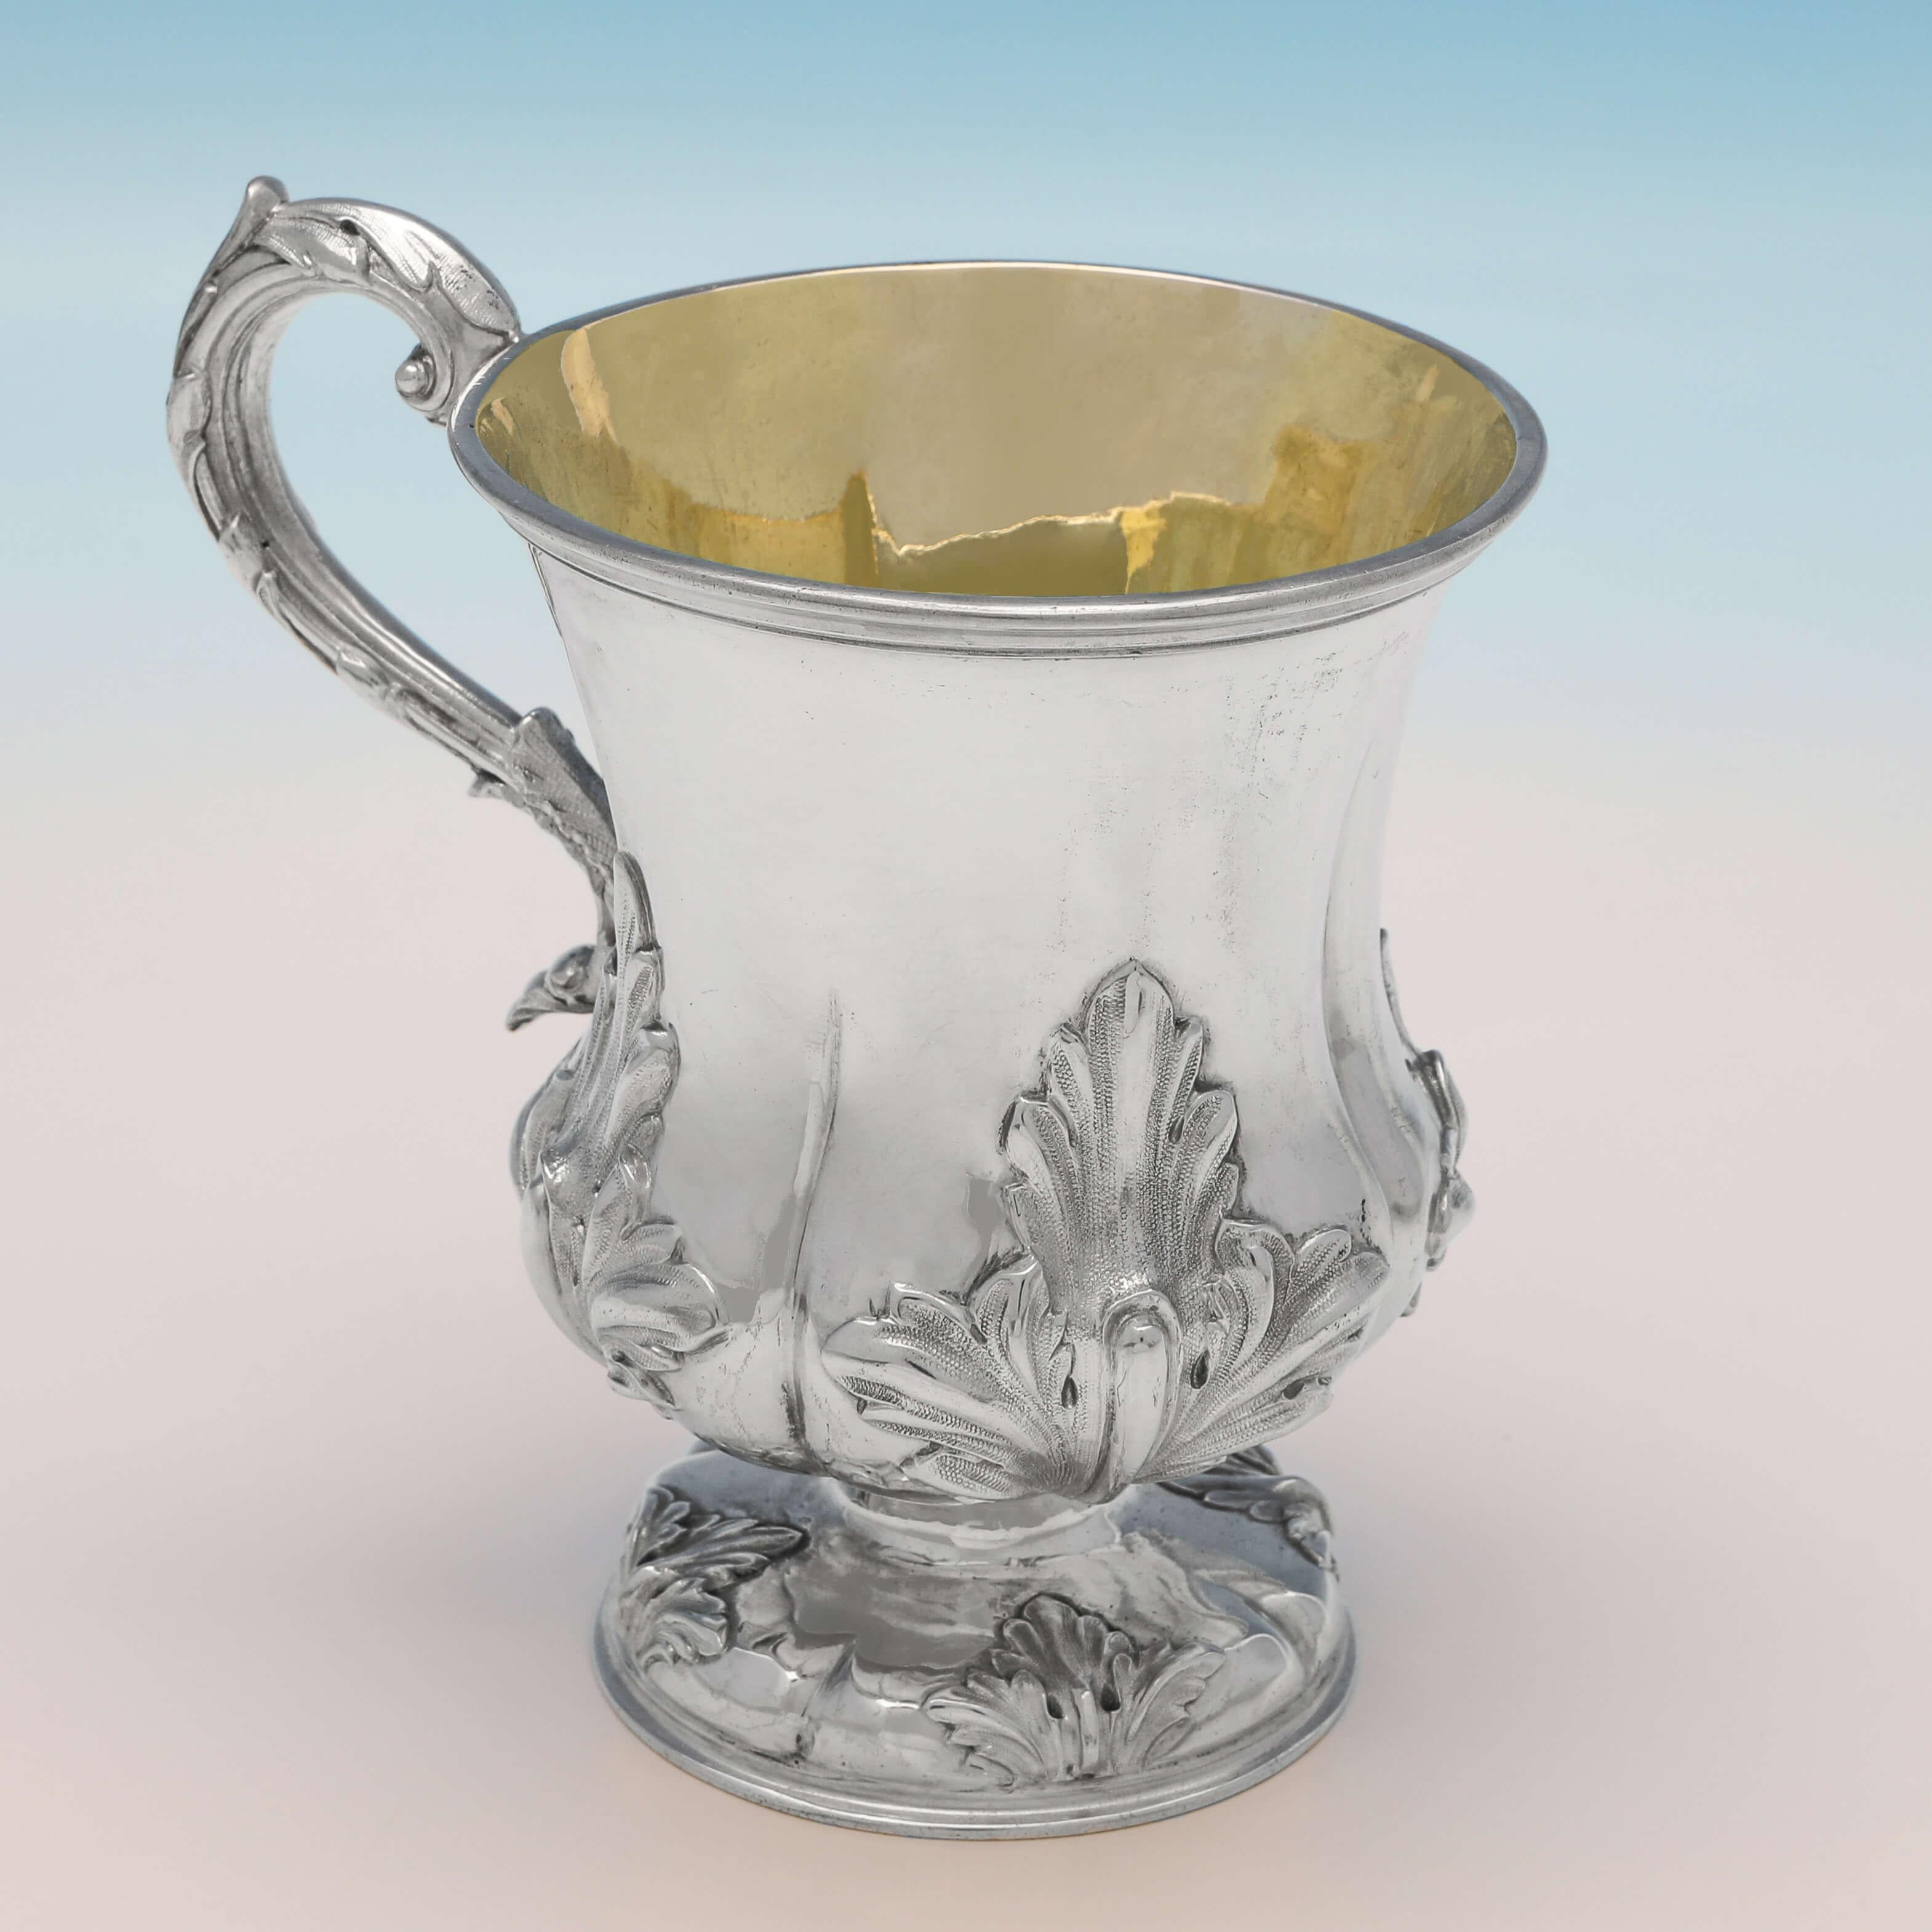 Hallmarked in London in 1840 by John Tapley, this stylish, Victorian, antique sterling silver christening mug, features chased acanthus decoration, a gilt interior and an acanthus detailed scroll handle. The christening mug measures 4.5